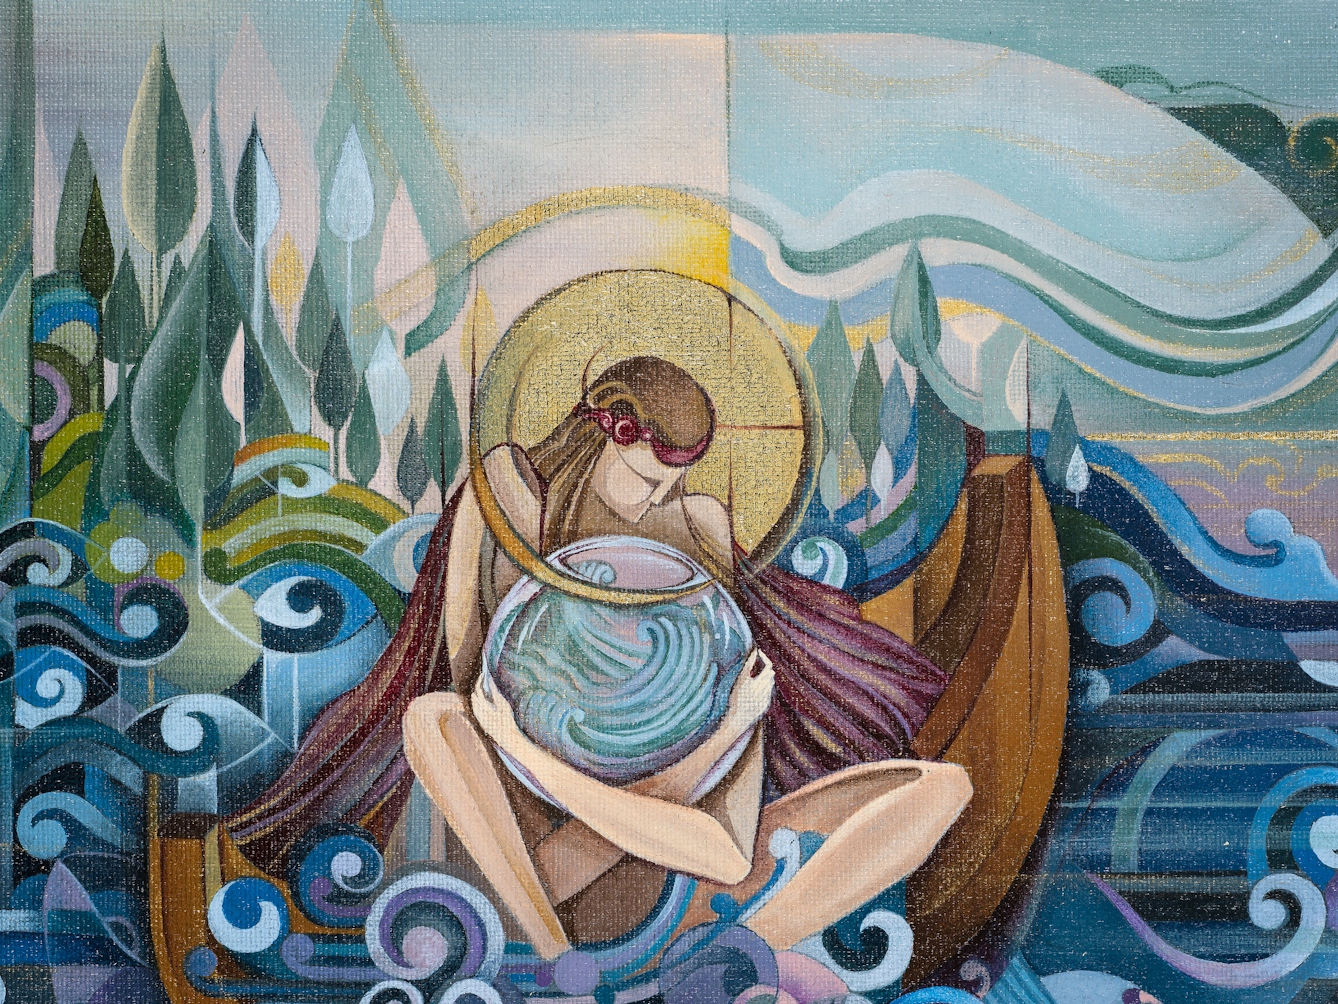 Artwork in acrylic paint on canvas showing a stylistic portrayal of a woman sat cross legged in a wooden boat surrounded by swirling water. She is clutching a globe-like shape in her arms and her head is bowed. She seems to have golden halo around her head. Behind her in the distance are the green shapes of land and trees, and a sun setting over the watery horizon.